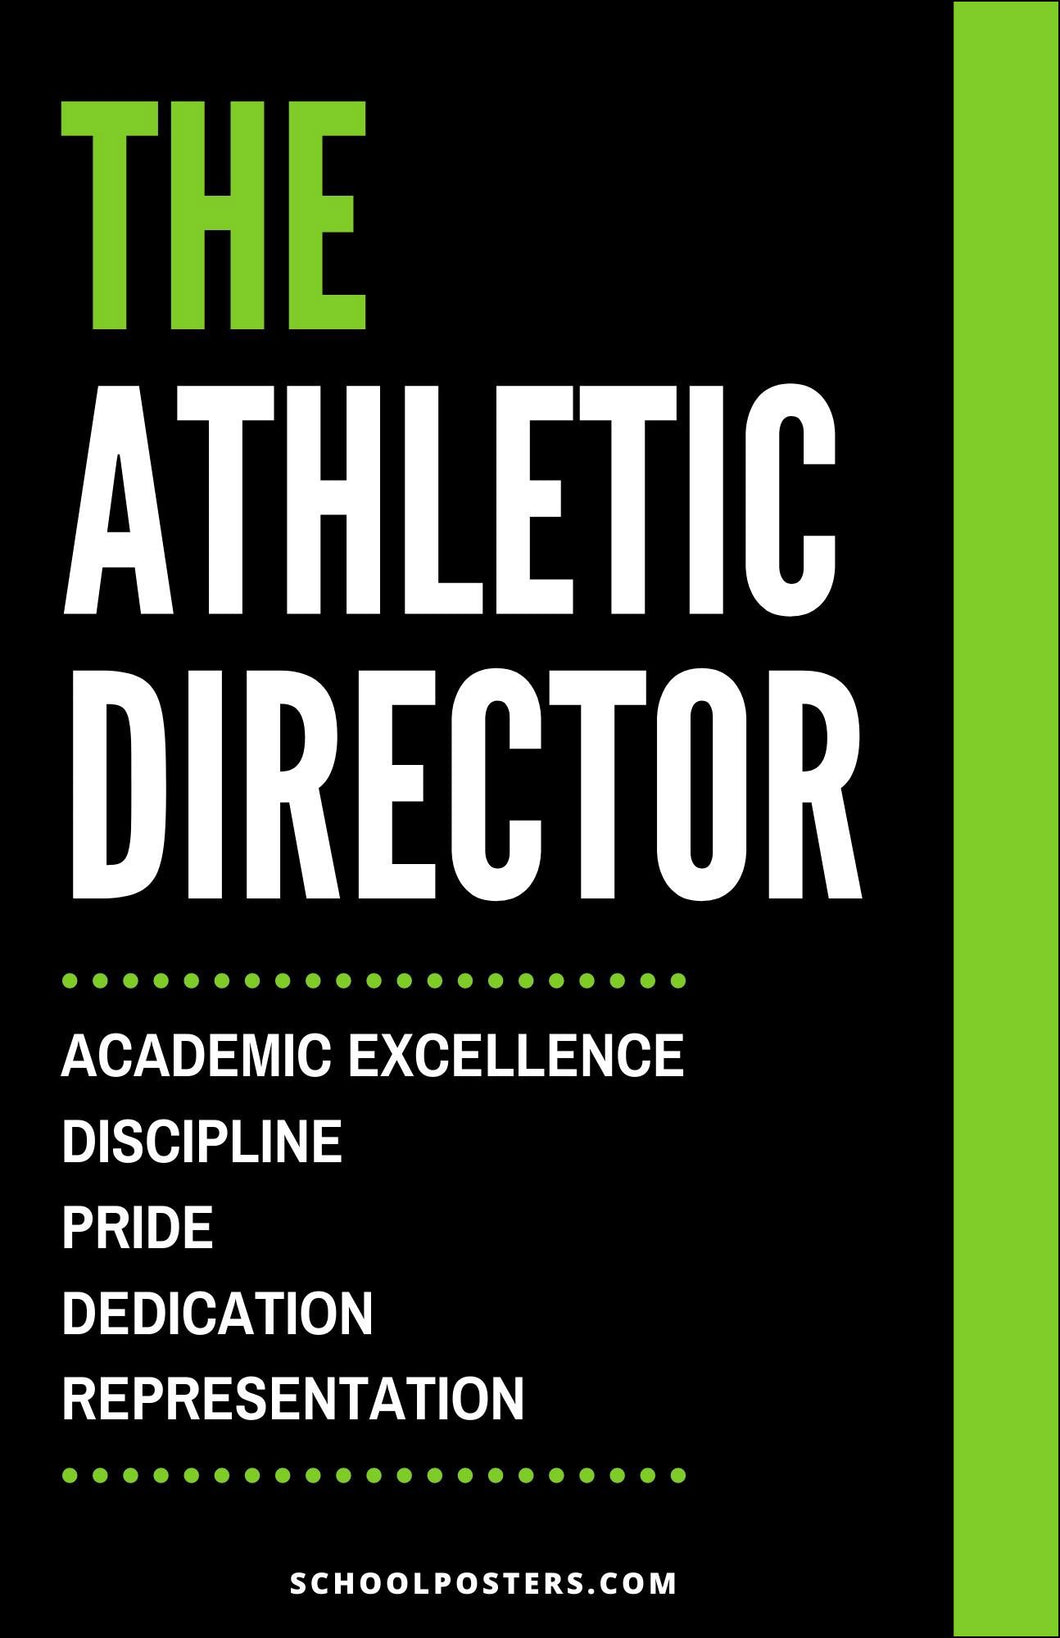 The Athletic Director Poster